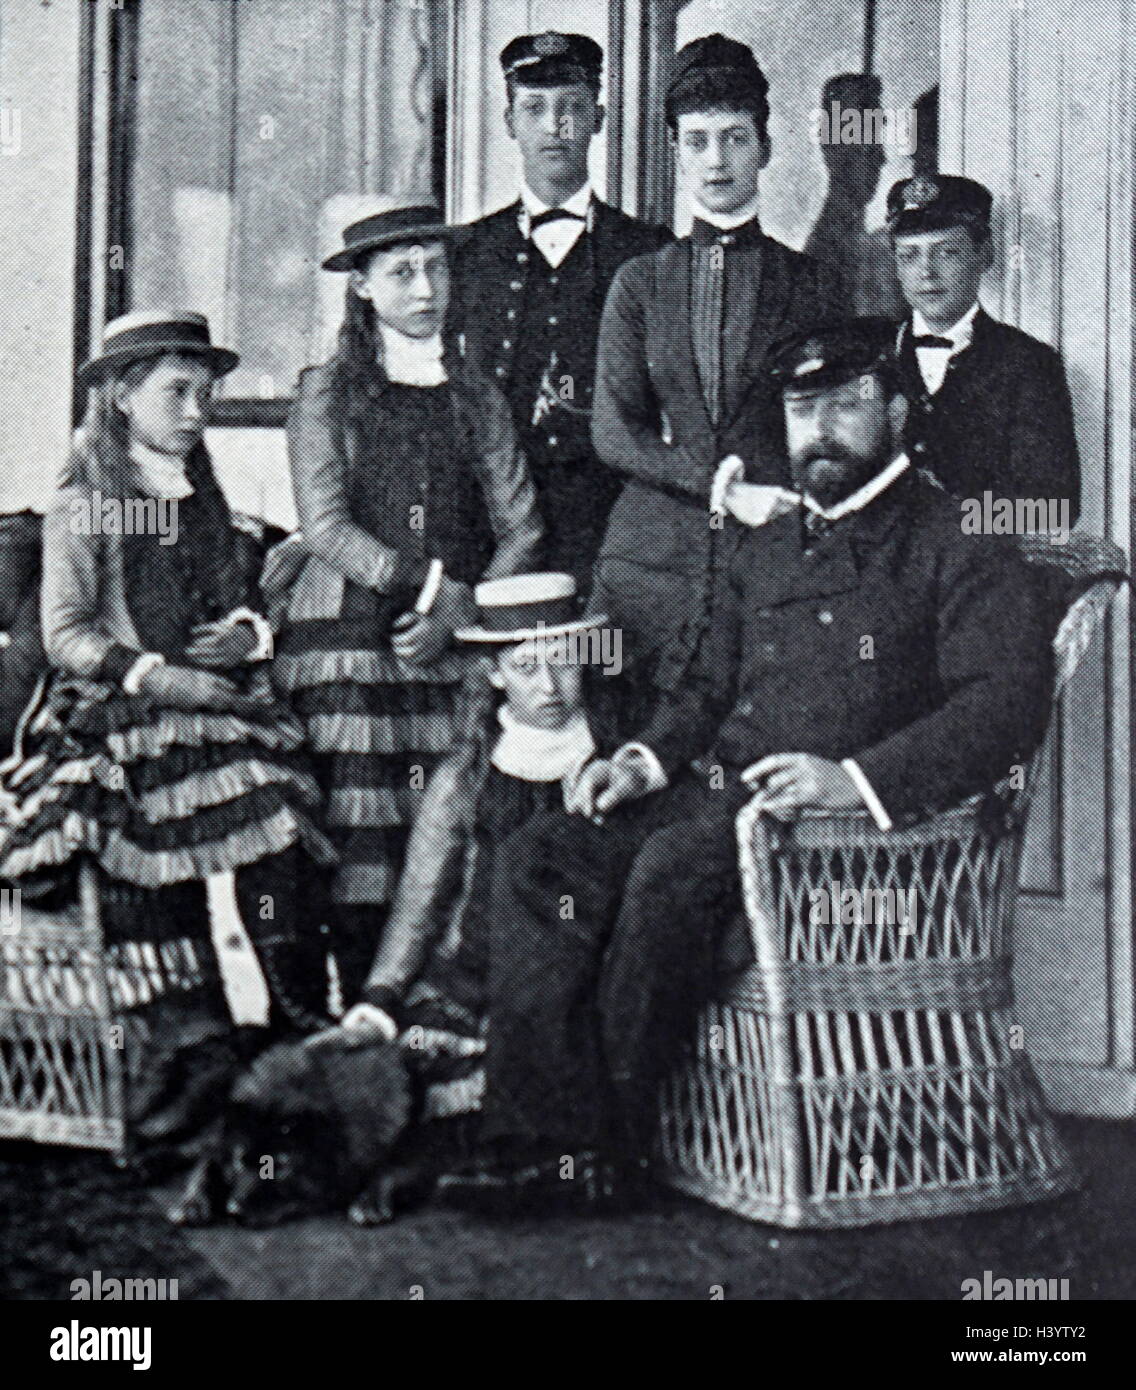 photograph-of-edward-vii-with-queen-alexandra-of-denmark-and-other-H3YTY2.jpg